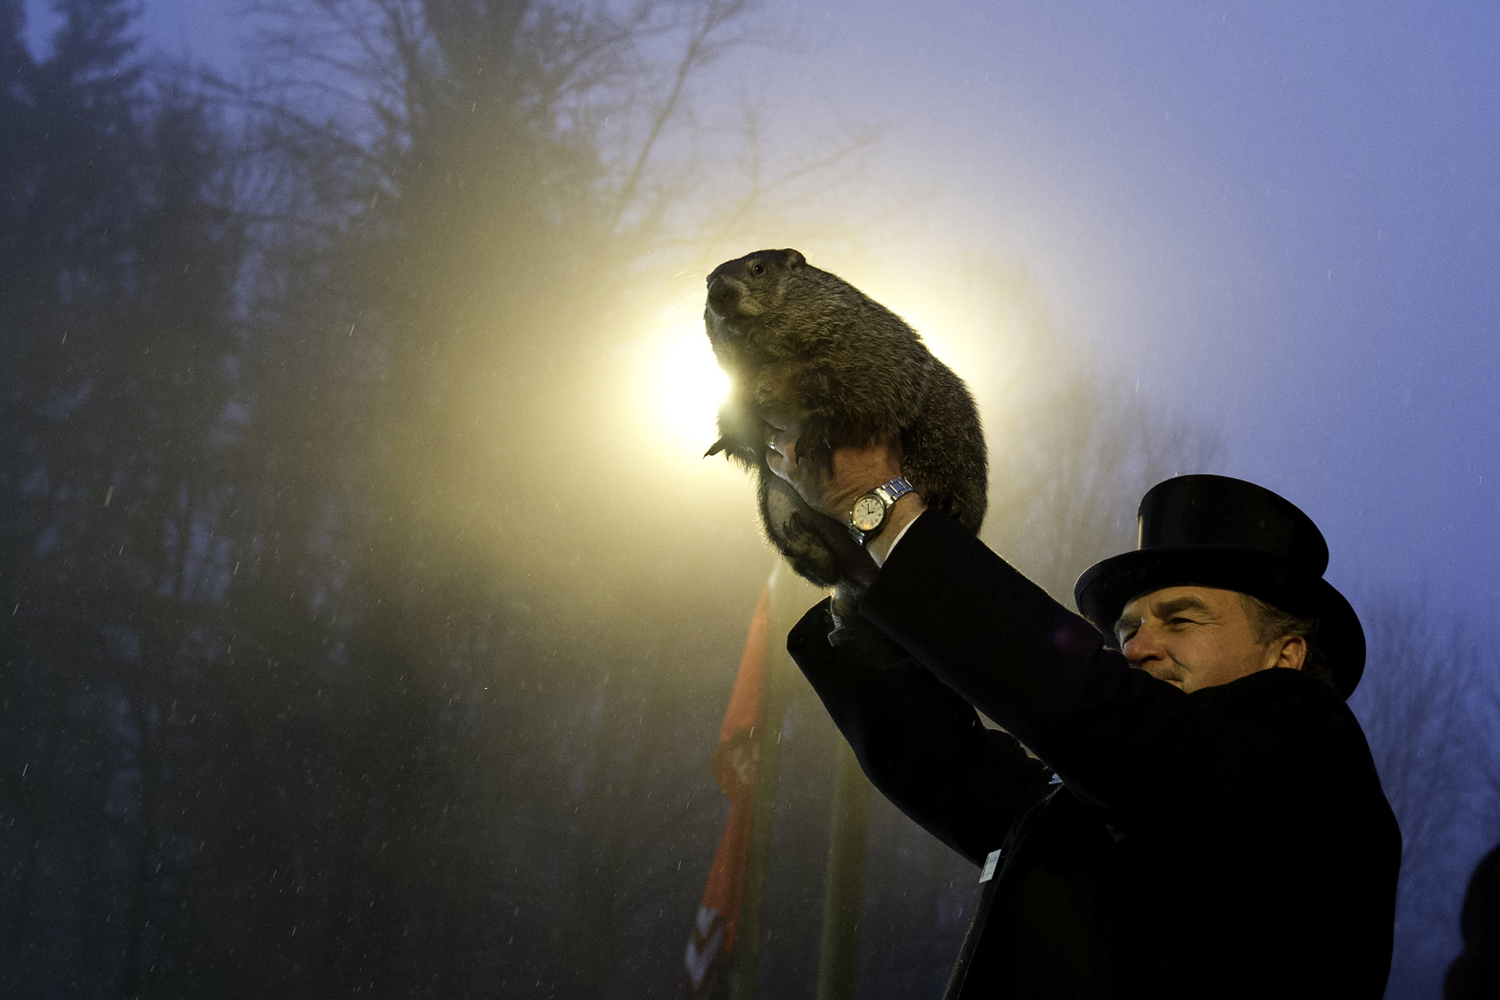 Feb. 2, 2014. Groundhog handler John Griffiths holds Punxsutawney Phil after he saw his shadow predicting six more weeks of winter during 128th annual Groundhog Day festivities in Punxsutawney, Pa.